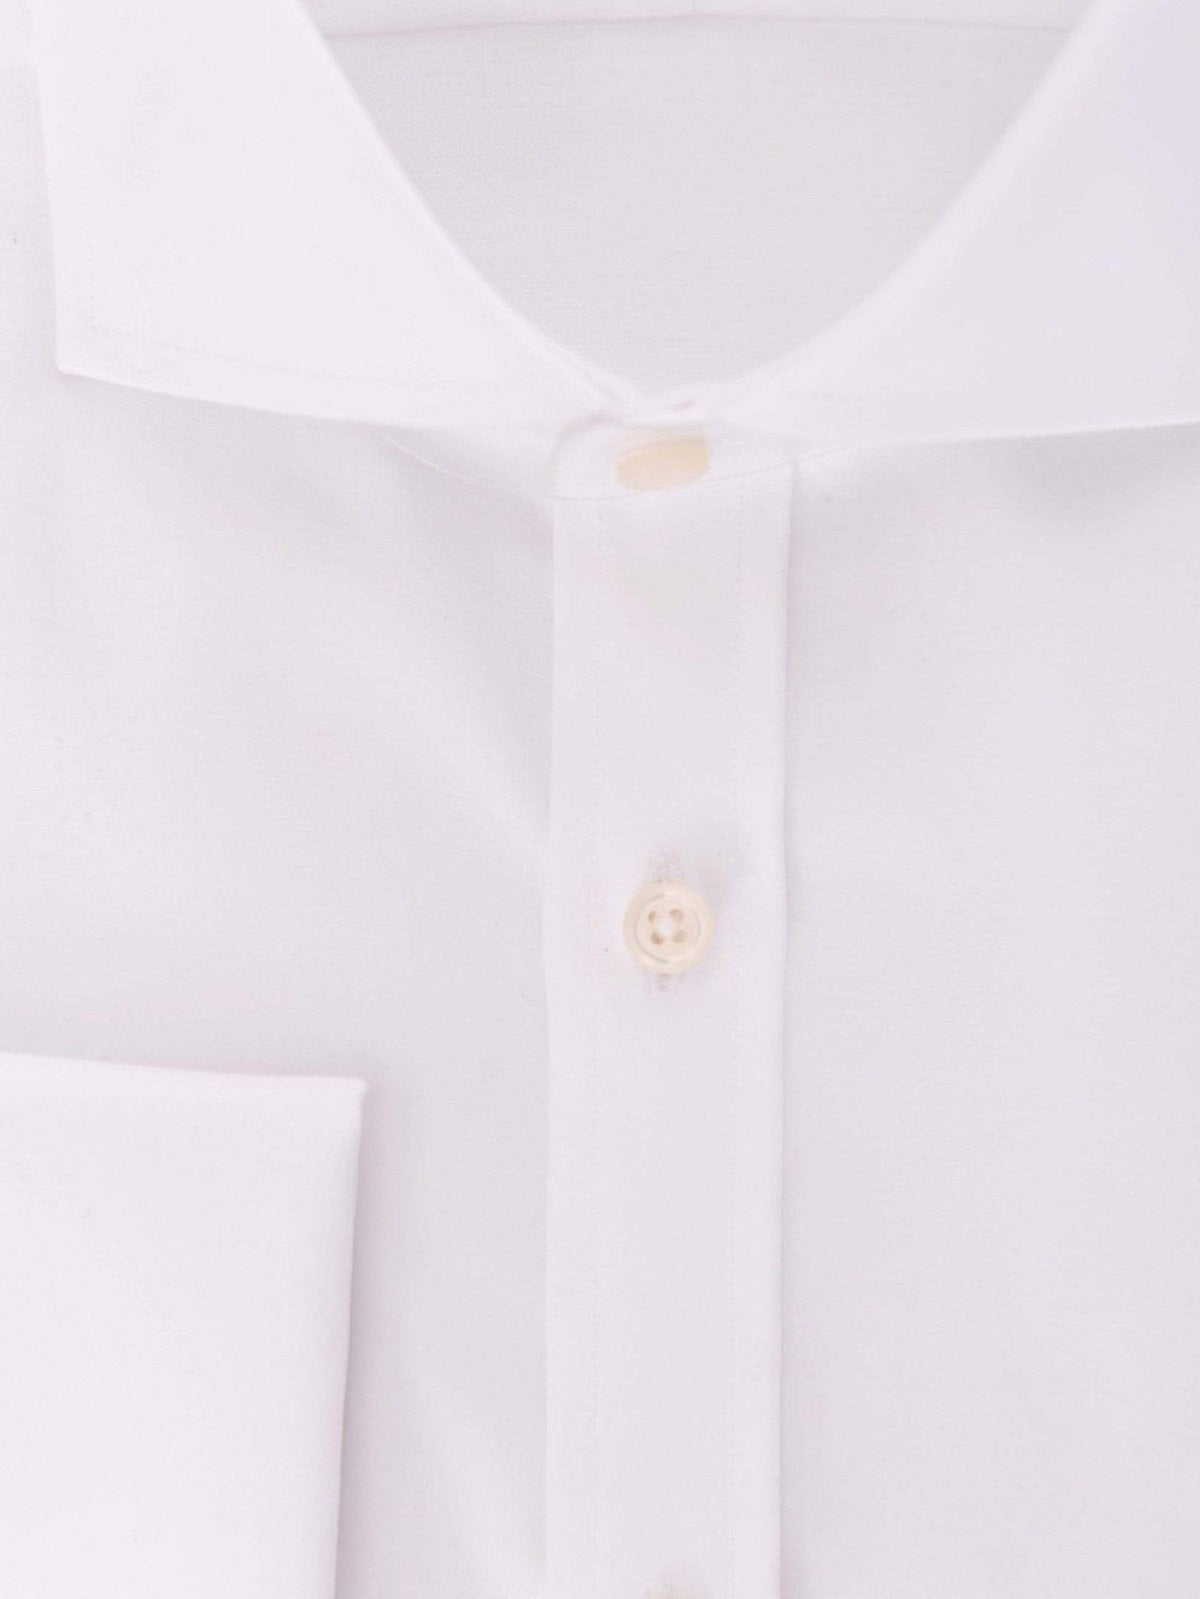 Christopher Morris Cotton Non-Iron White French Cuff Classic Fit Dress Shirt